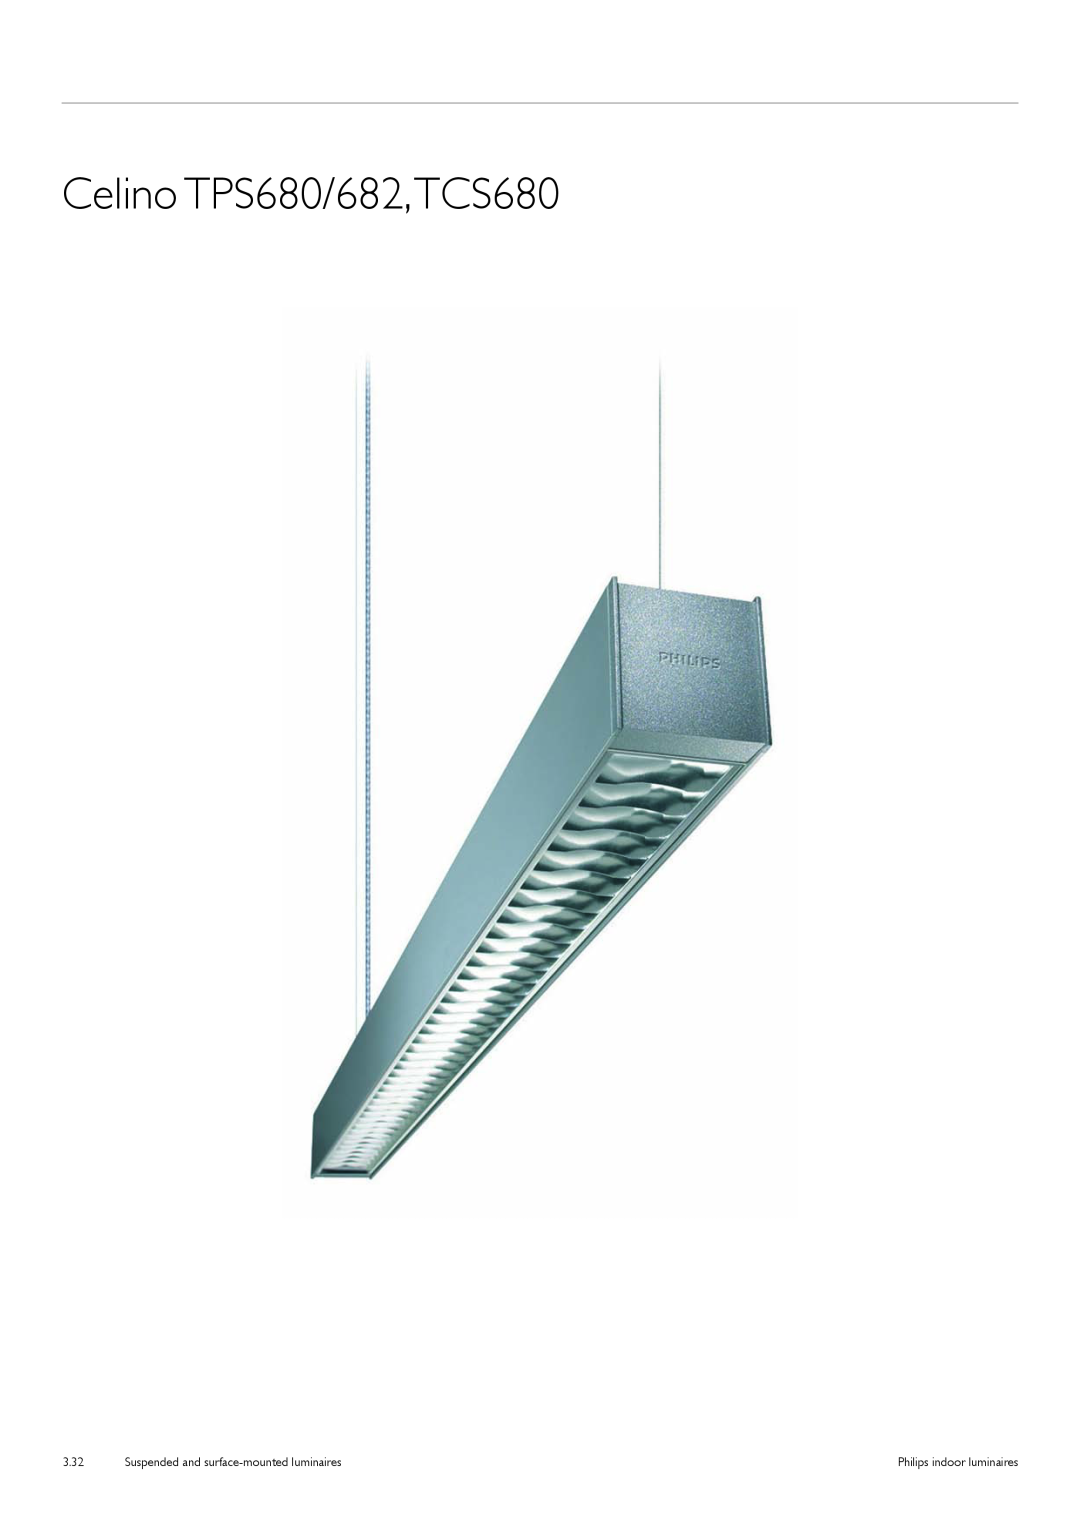 Philips TCS125 manual Celino TPS680/682,TCS680, Suspended and surface-mountedluminaires, 3.32, Philips indoor luminaires 